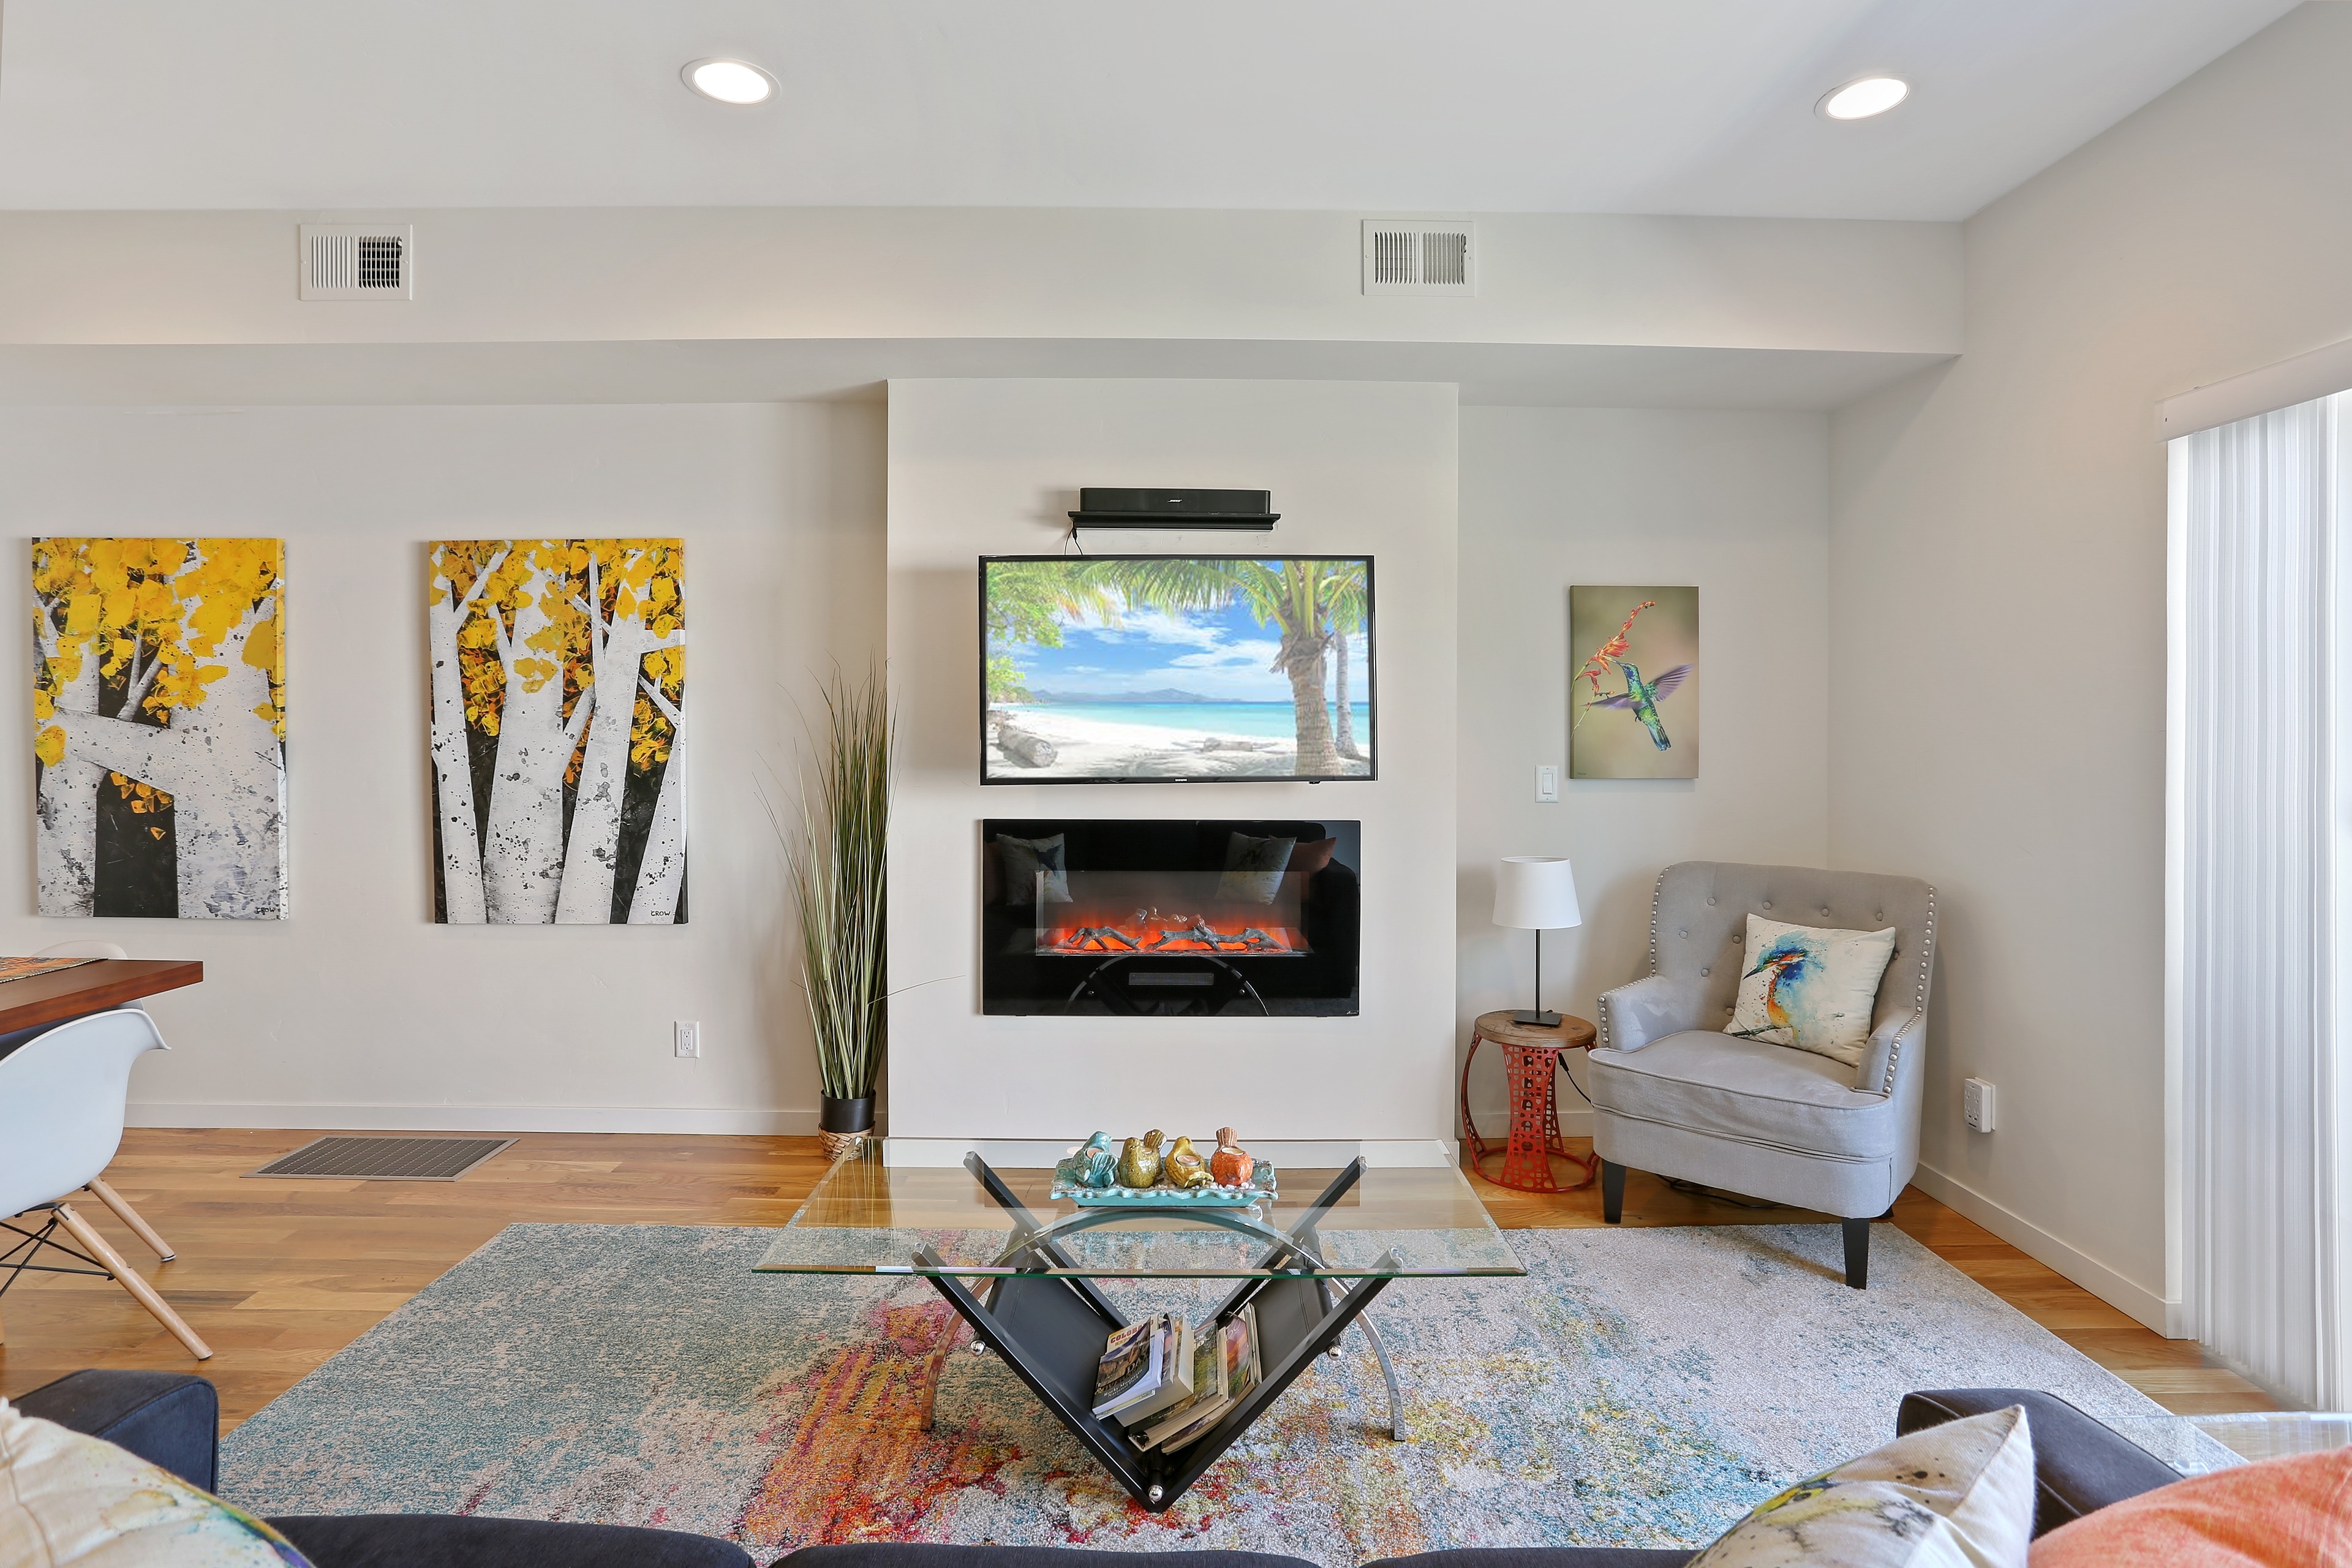 Living room with smart TV and electric fireplace.